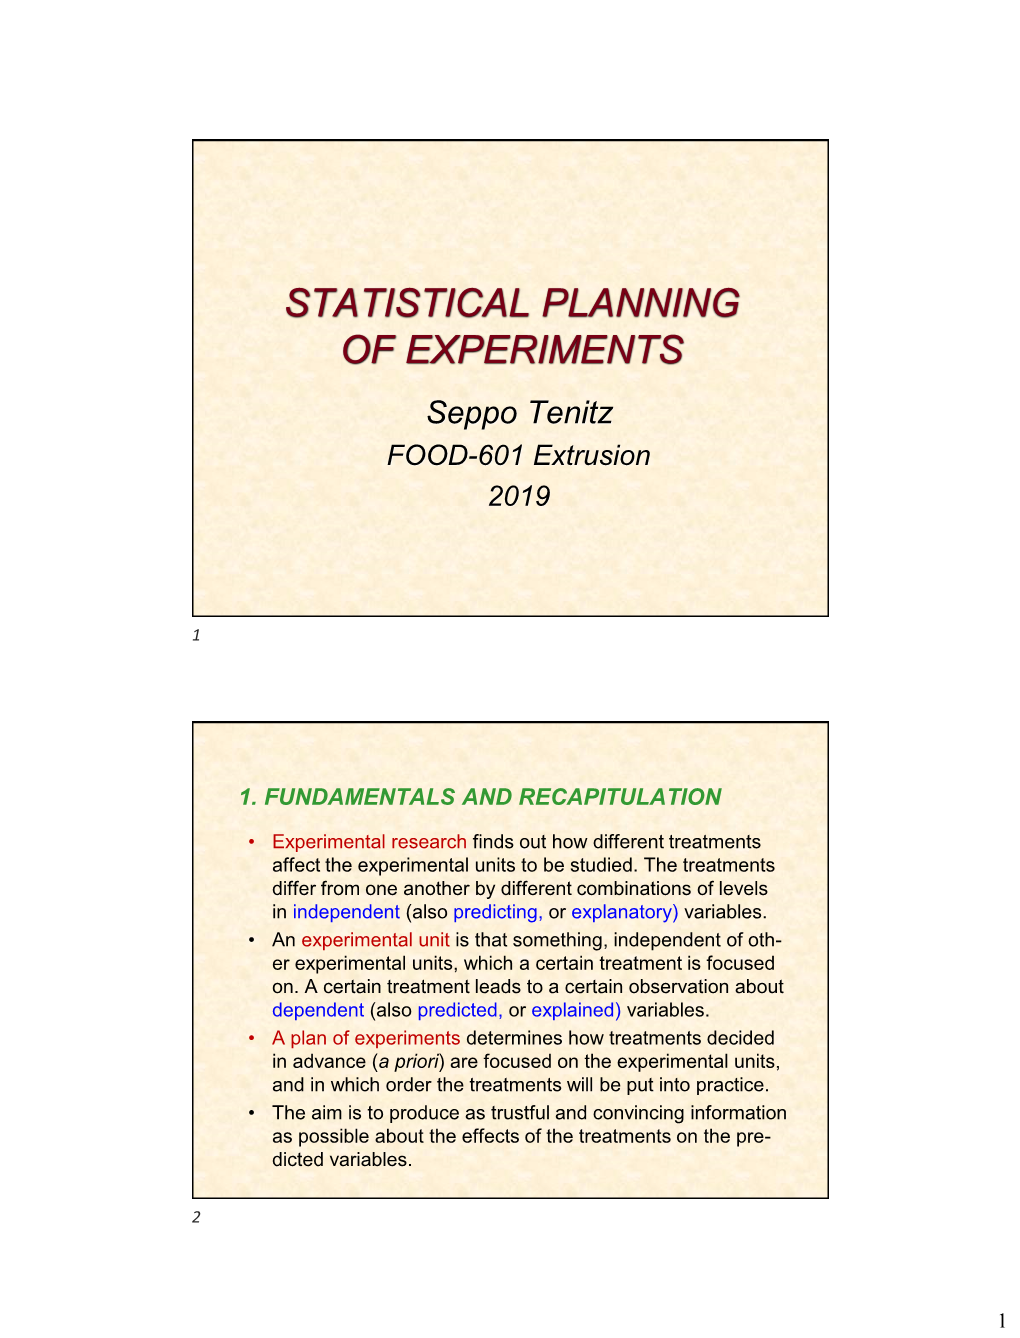 STATISTICAL PLANNING of EXPERIMENTS Seppo Tenitz FOOD-601 Extrusion 2019